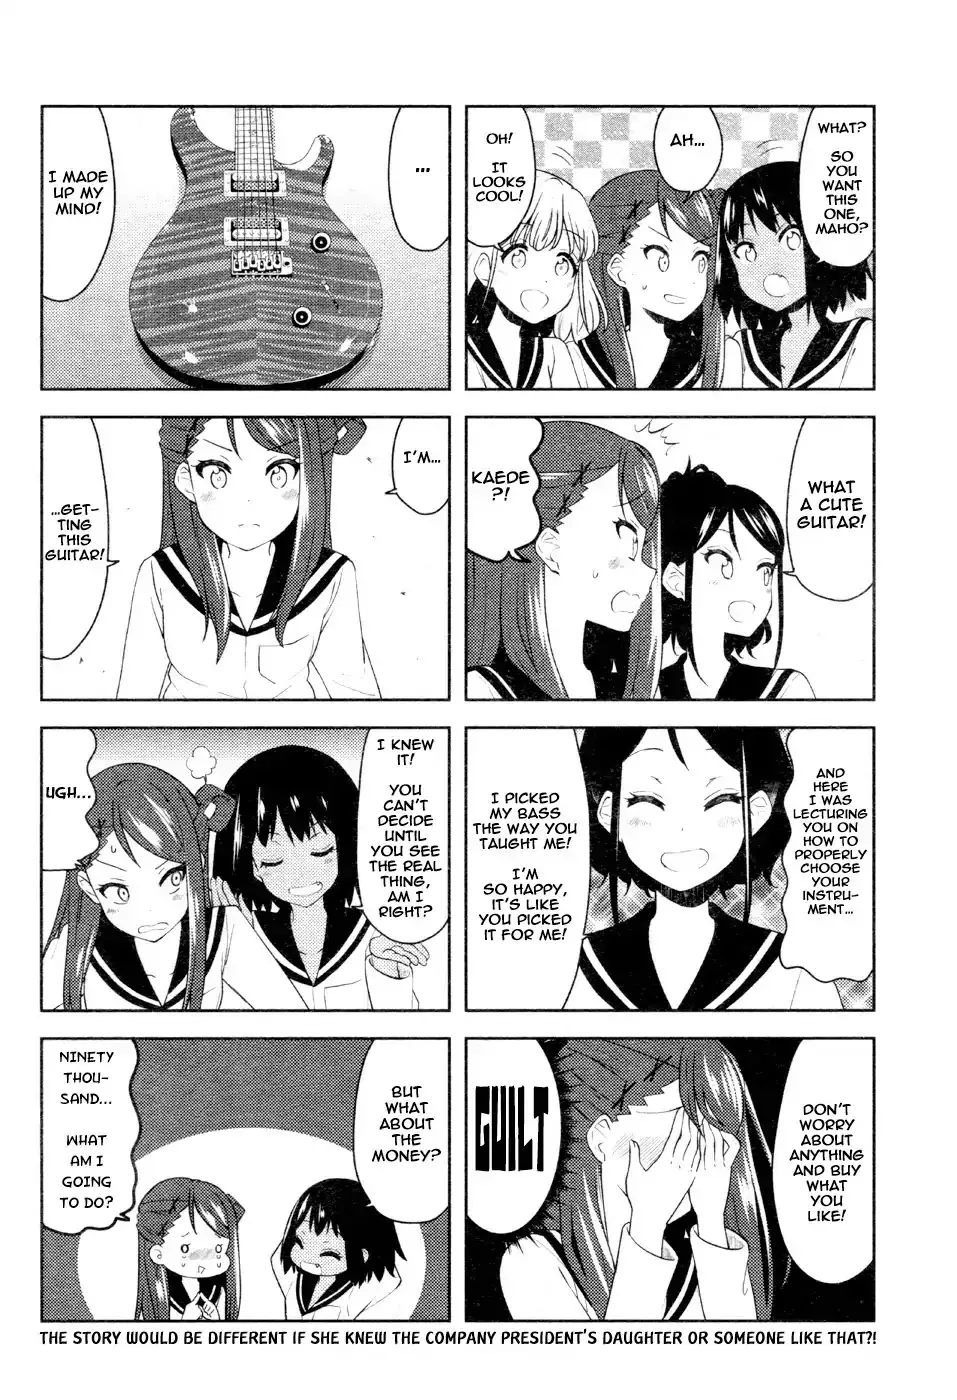 K-On! Shuffle - 4 page 8